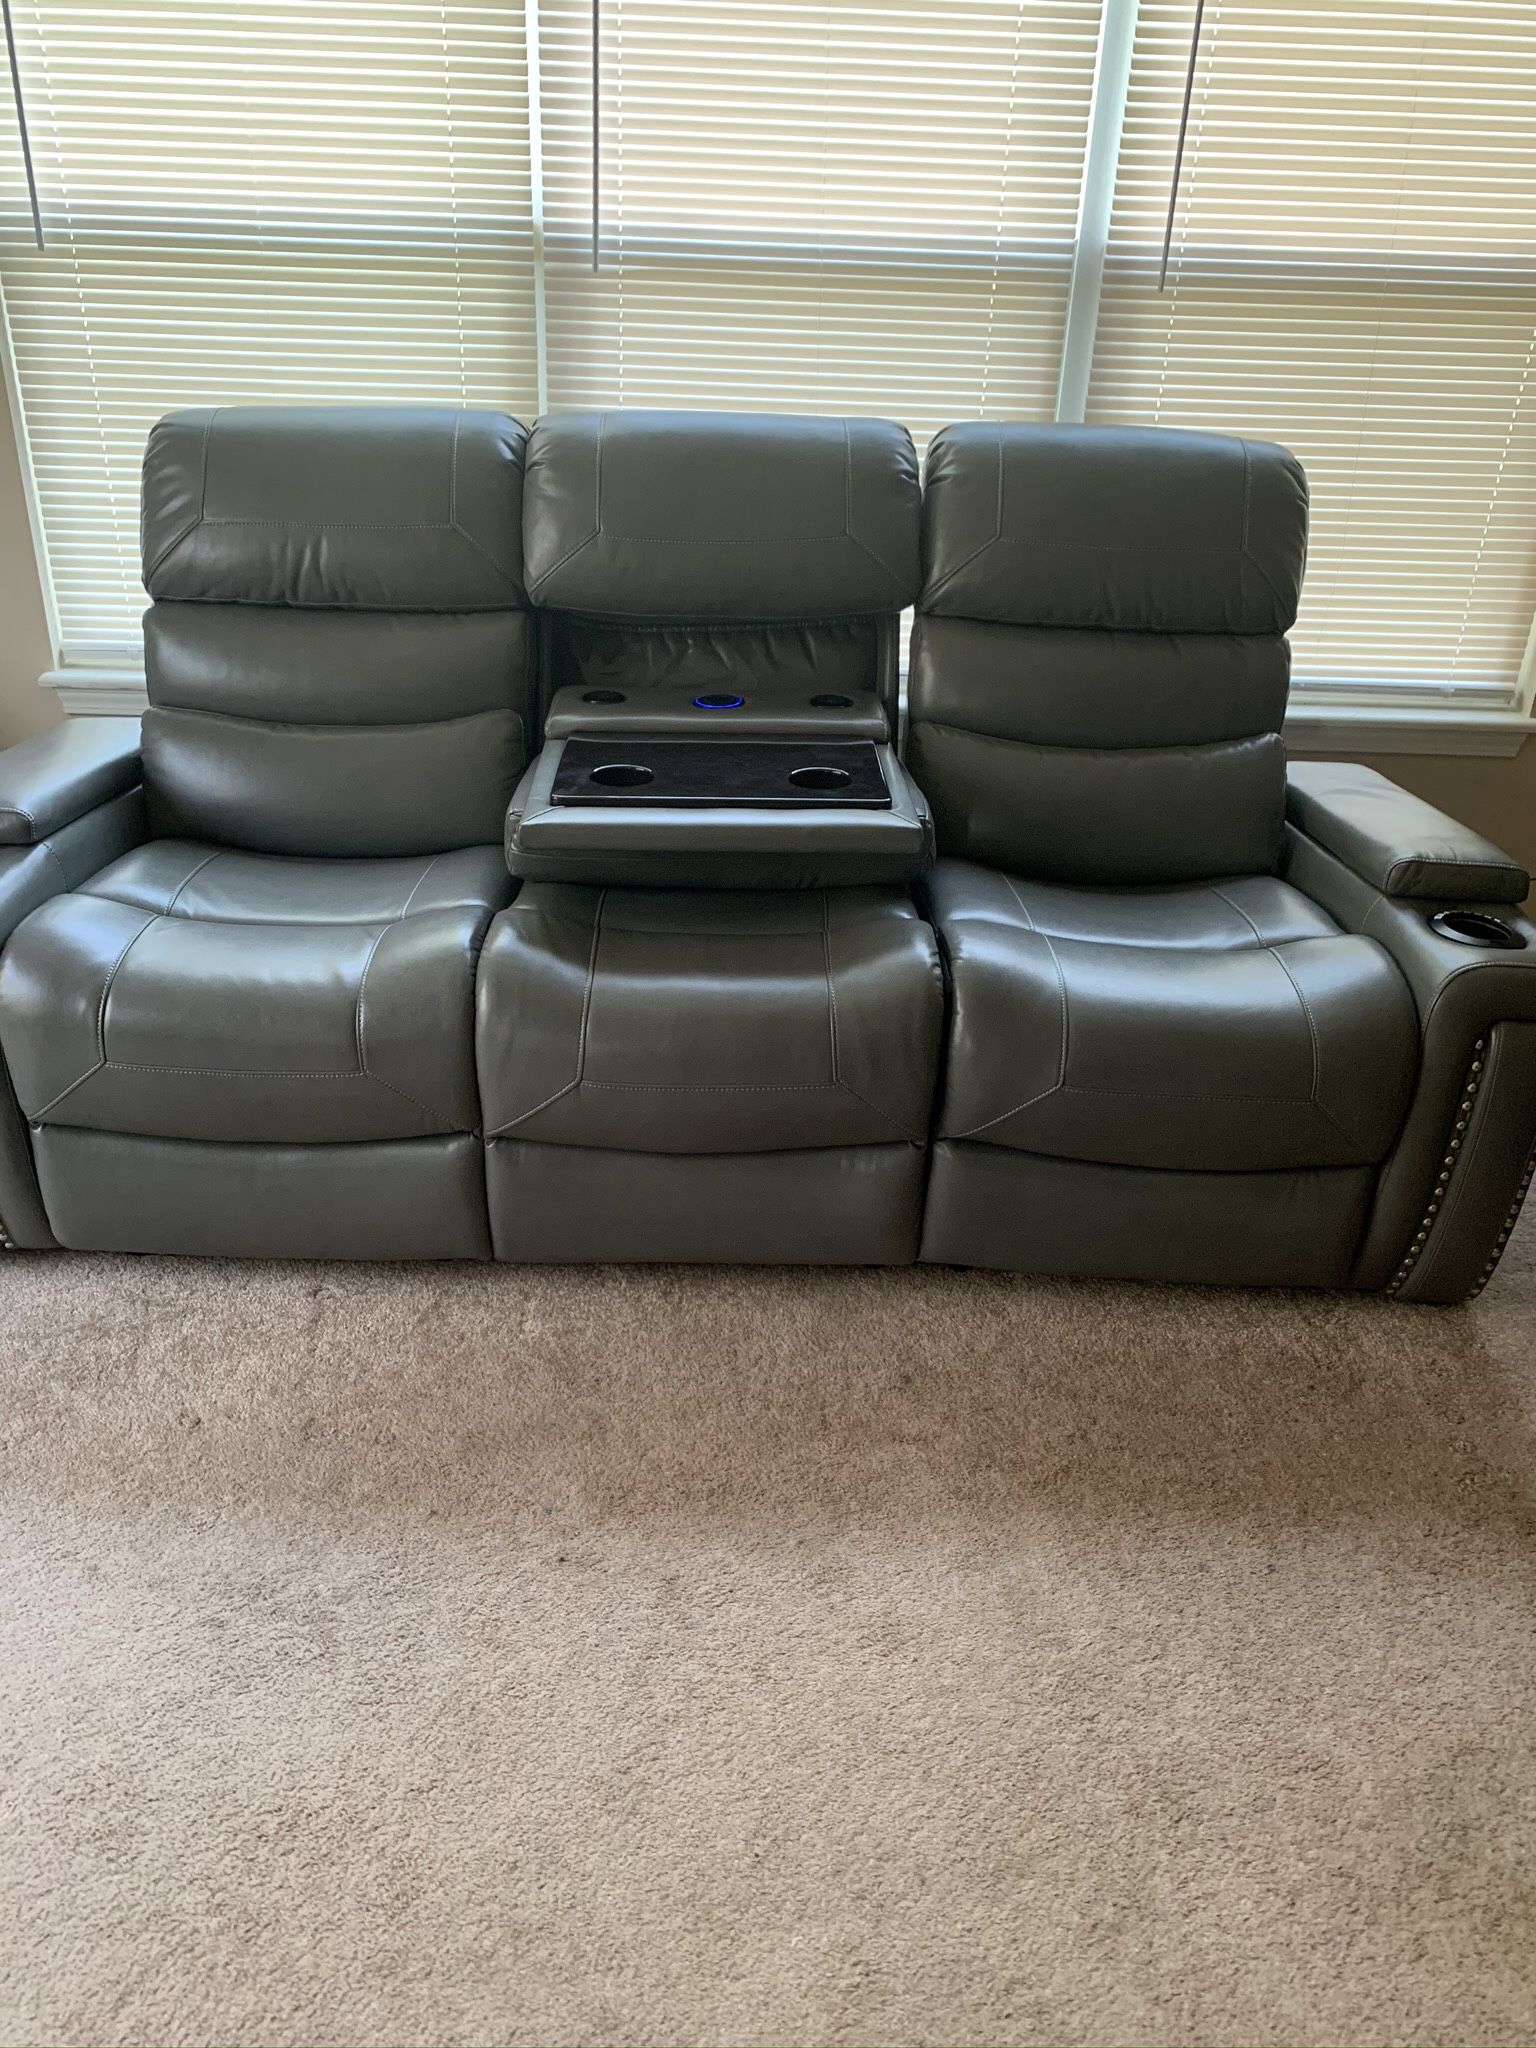 Gray Electric Leather Couch And Chair